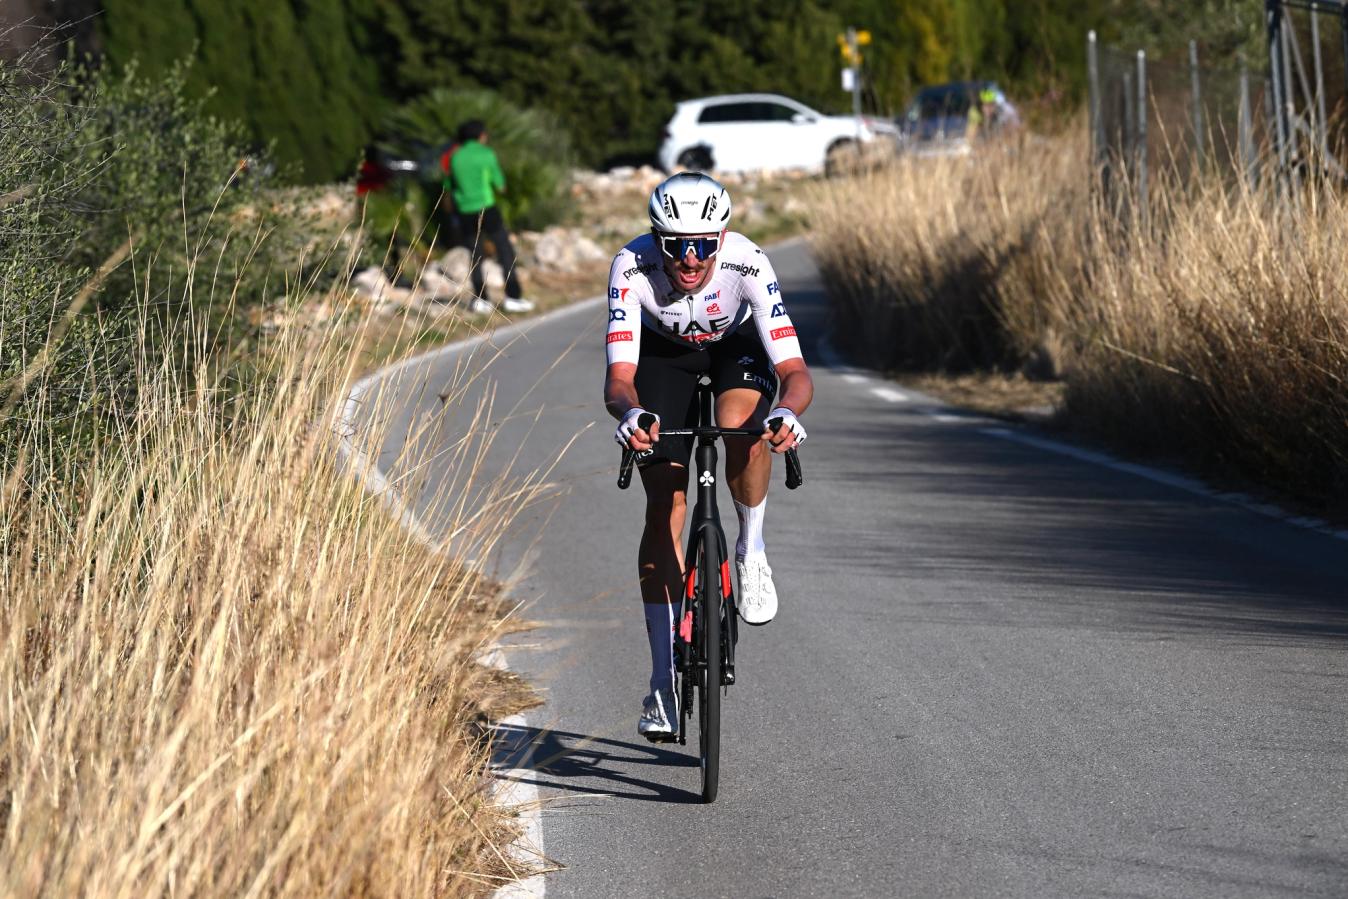 It drew a shy smile from McNulty when GCN posited that he should really be aiming for an overall victory in a WorldTour one-week, rather than simply eyeing up a podium berth